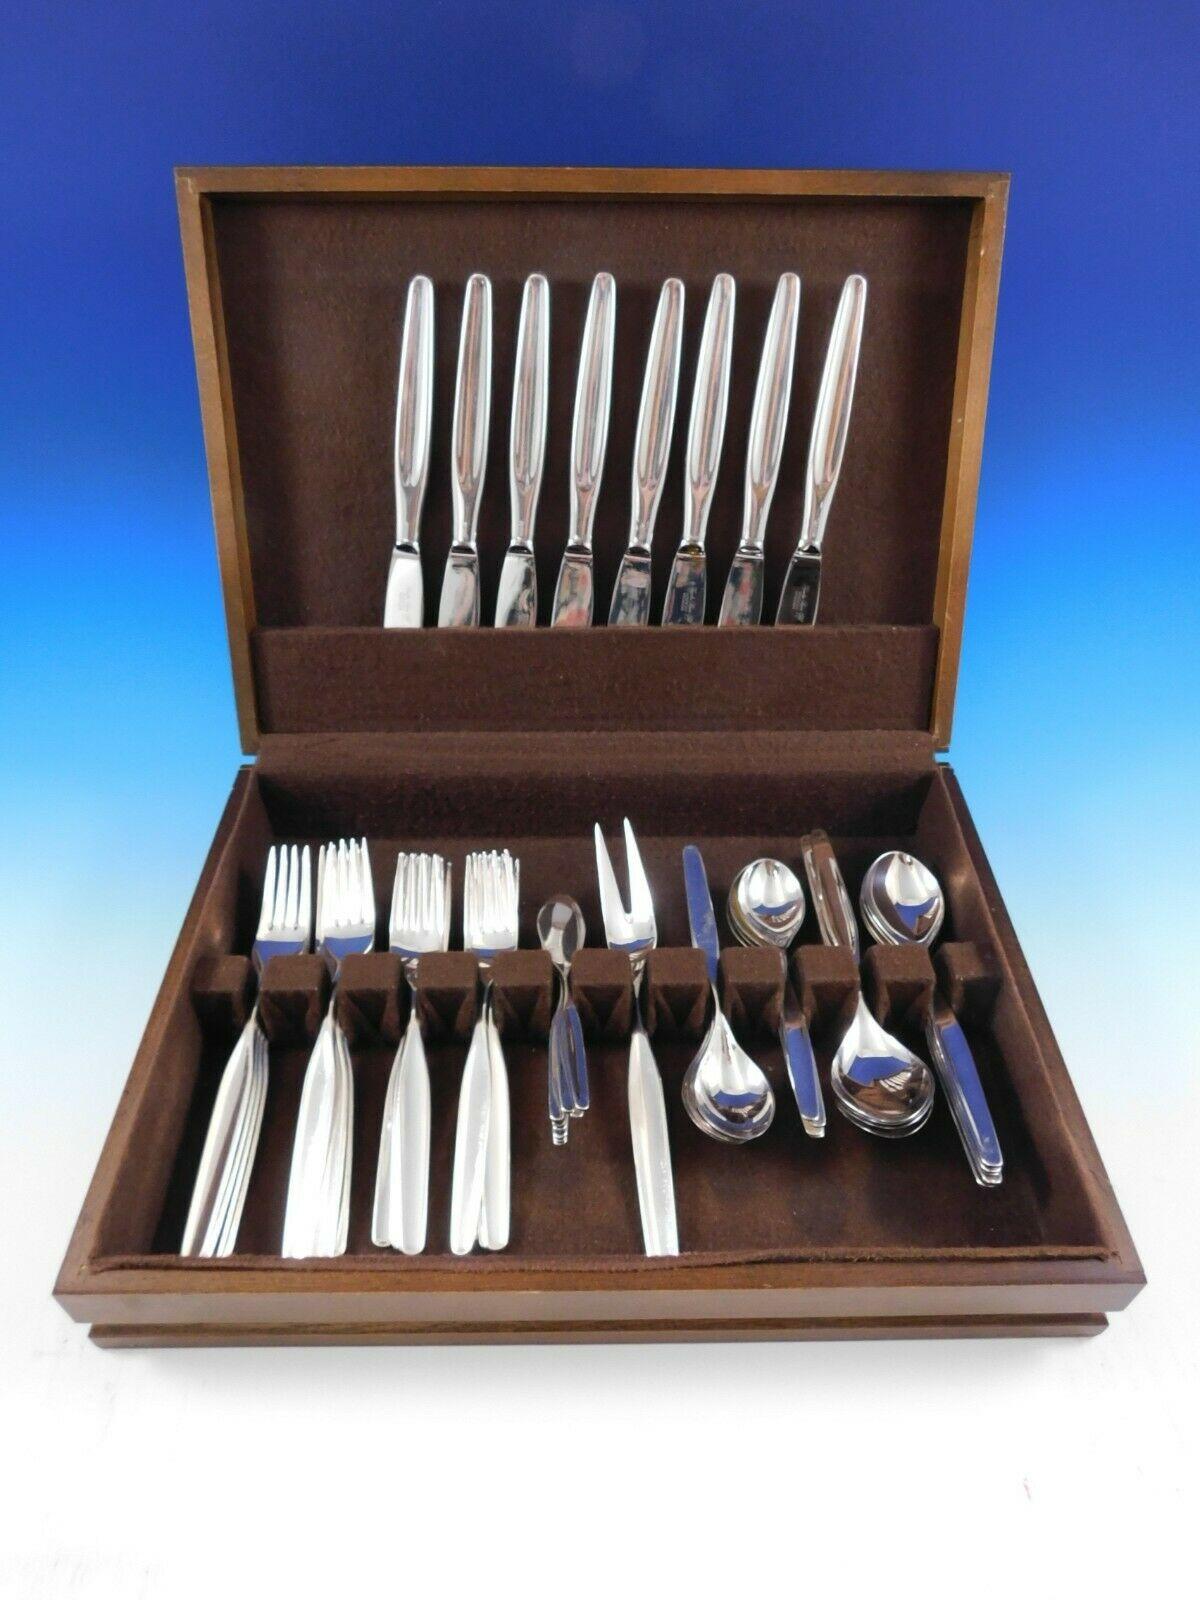 Rare Fjord by Th. Olsens 830 Silver Scandinavian Modern Flatware Set - 49 pieces. This set includes:

8 Dinner Knives, 8 3/4